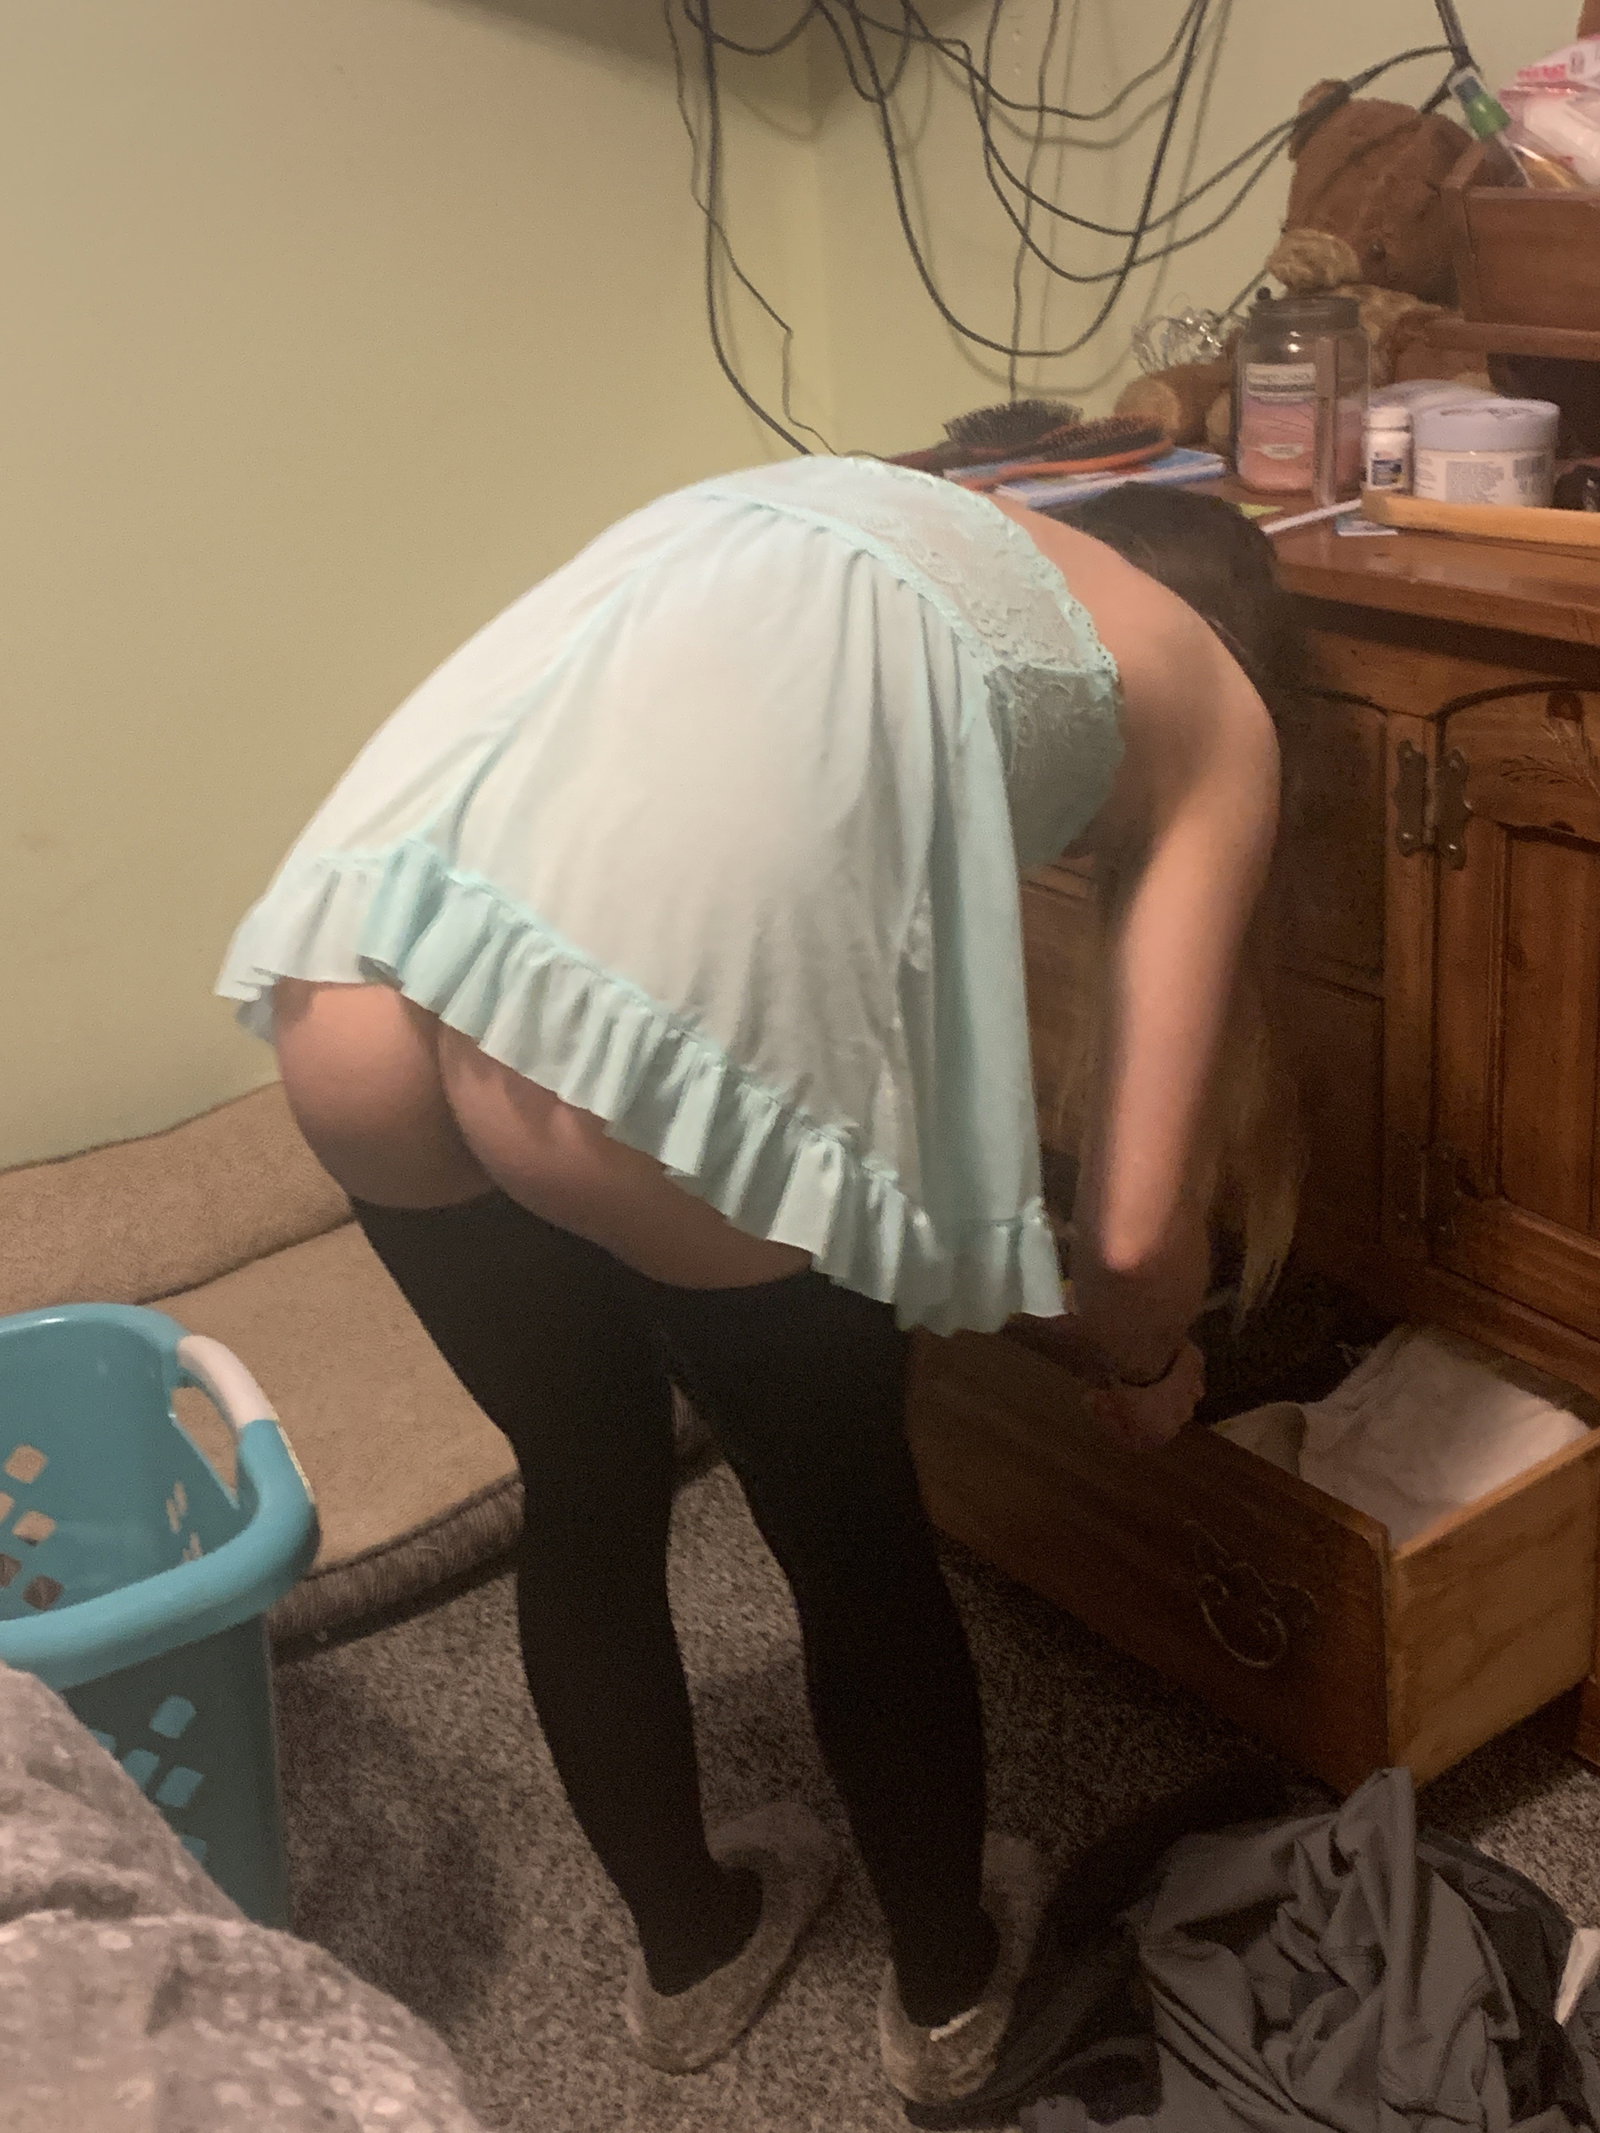 Photo by Rroofus74 with the username @Rroofus74,  July 22, 2019 at 2:34 AM. The post is about the topic Mysexywife1990 and the text says 'My view tonight'